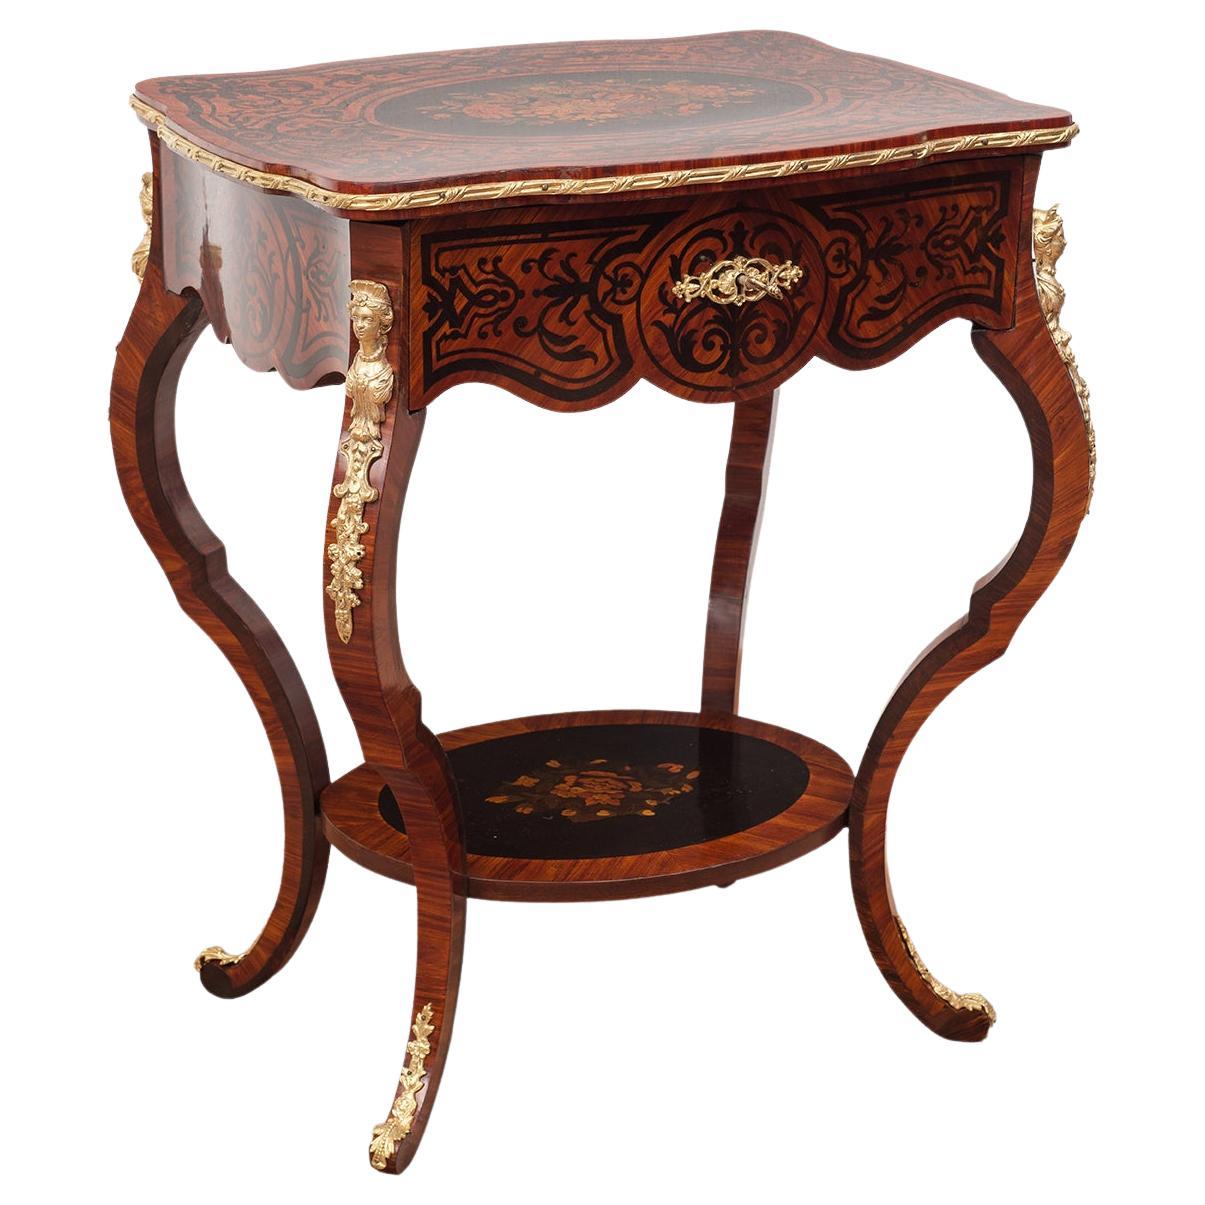 19th Century, Inlaid Work Table, with Gilt Bronze